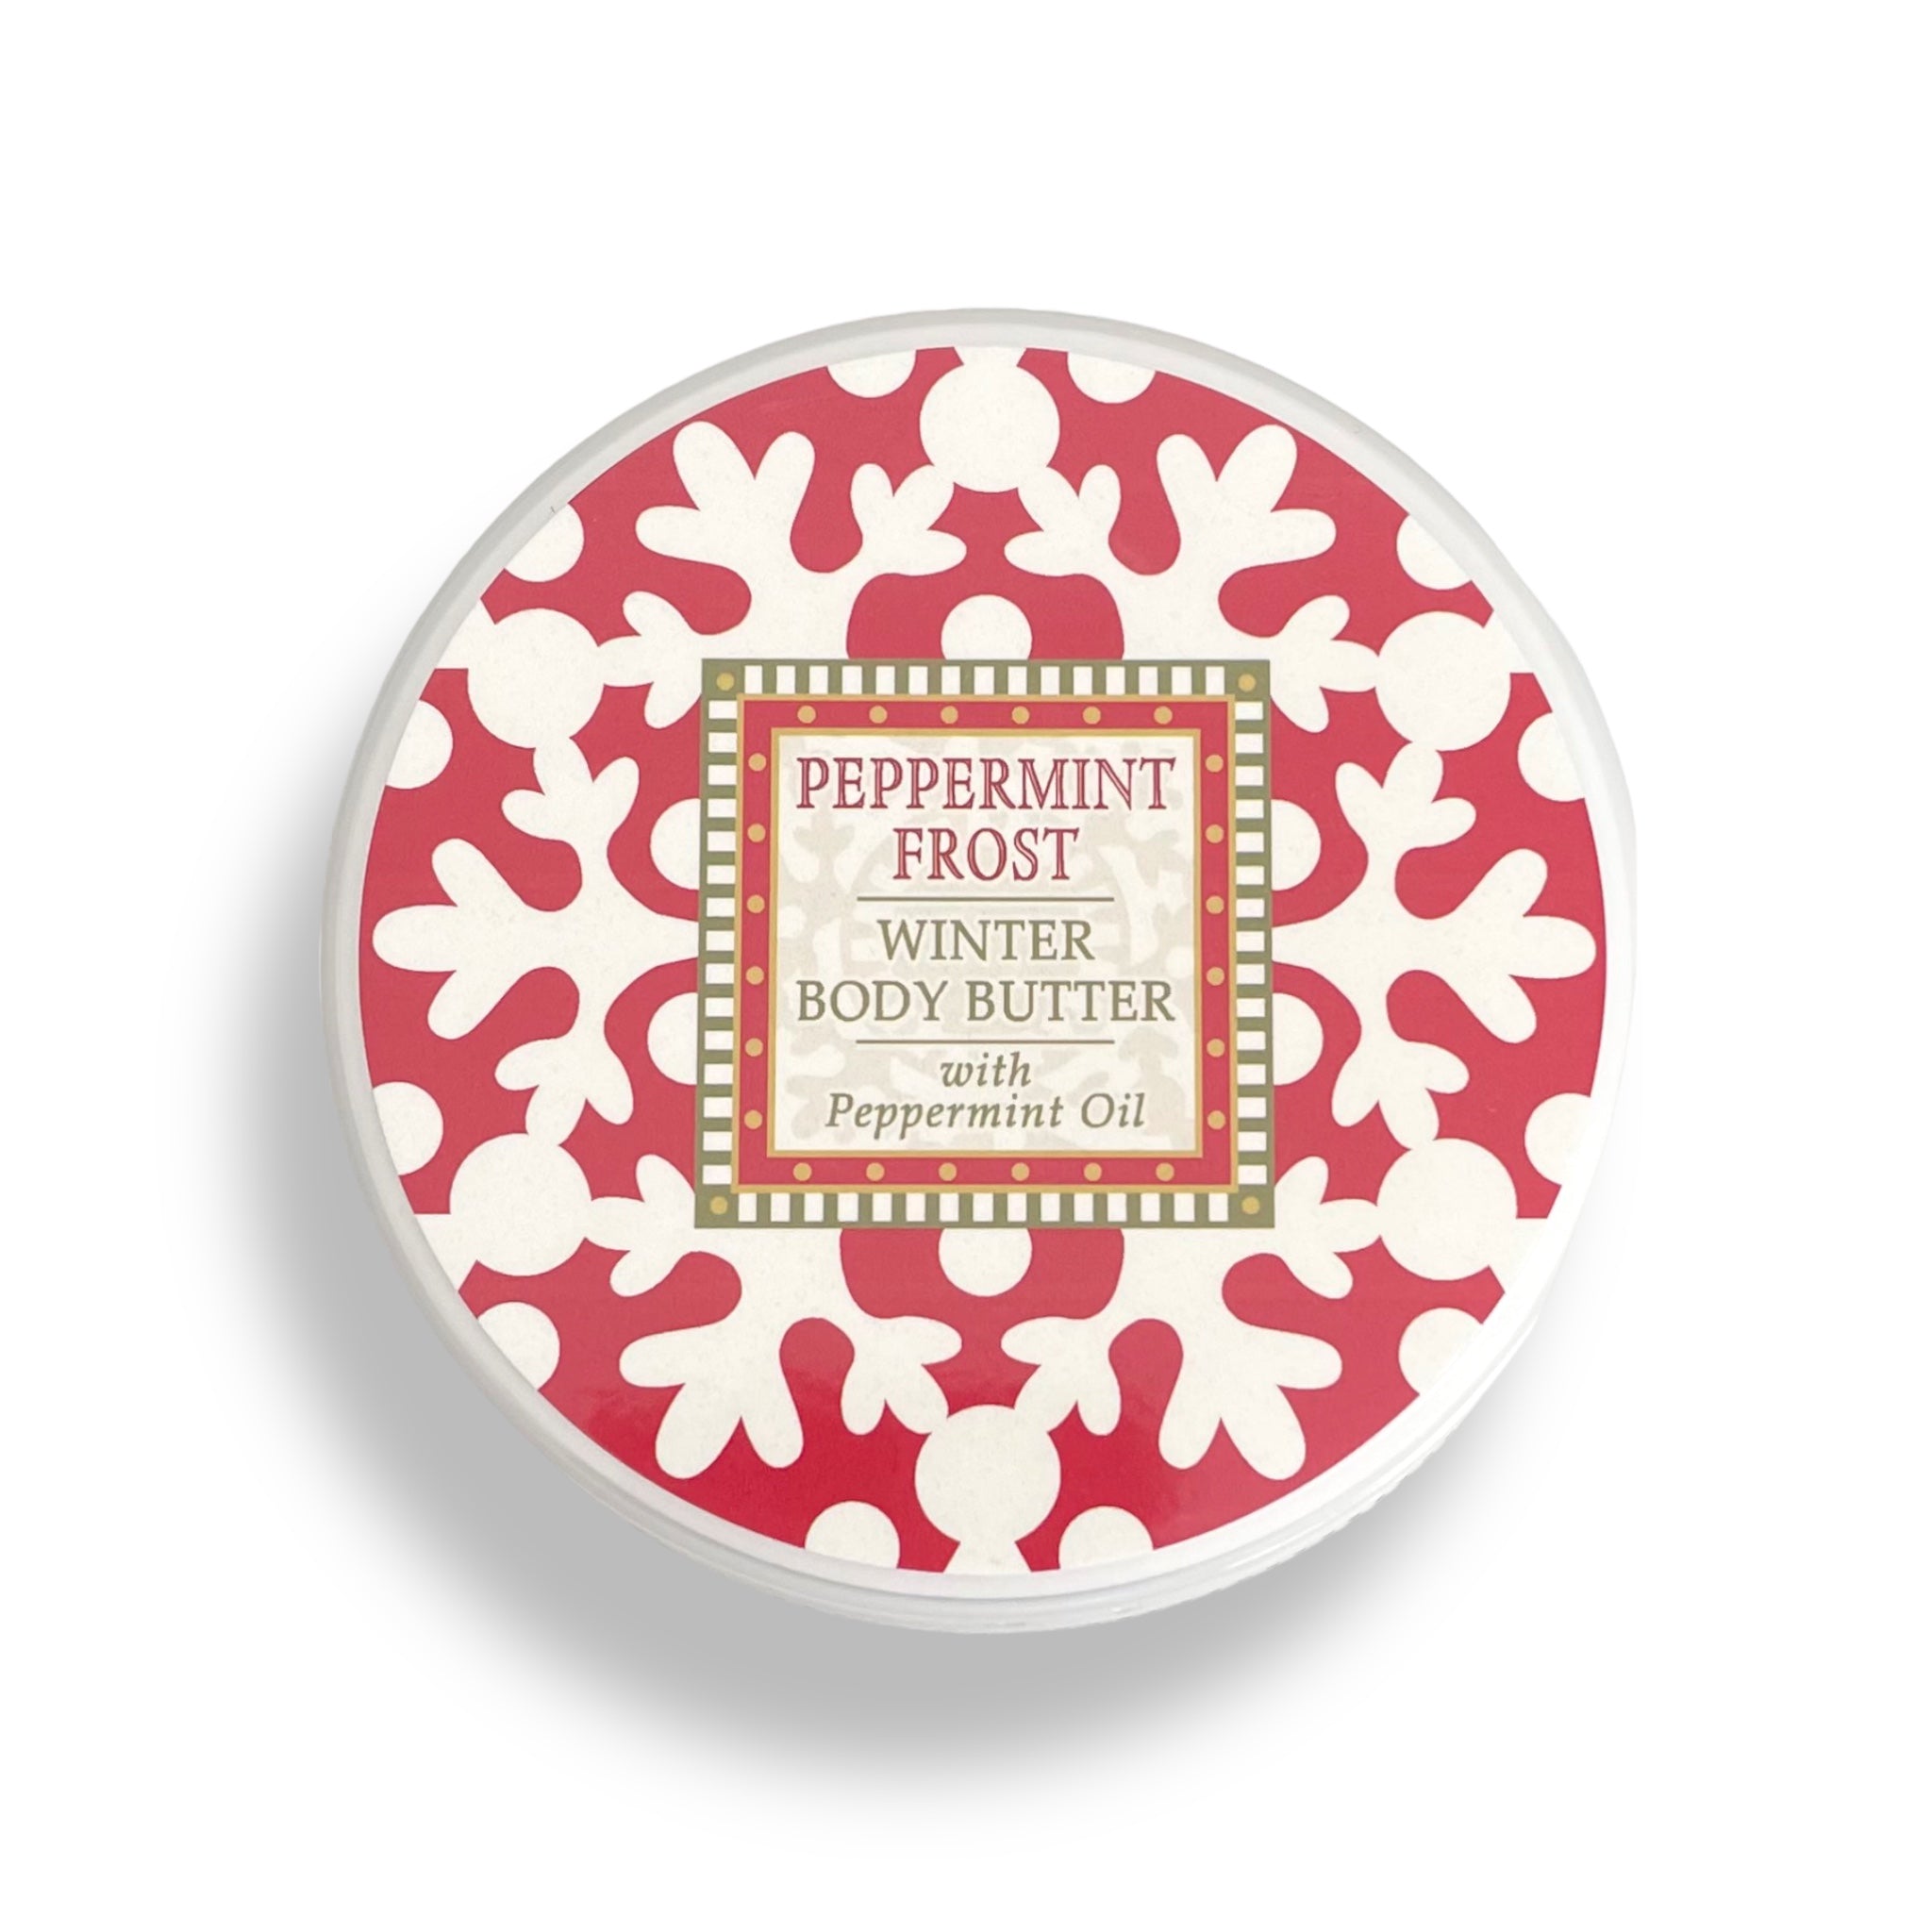 Greenwich Bay Trading Company Peppermint Frost Collection Body Butter